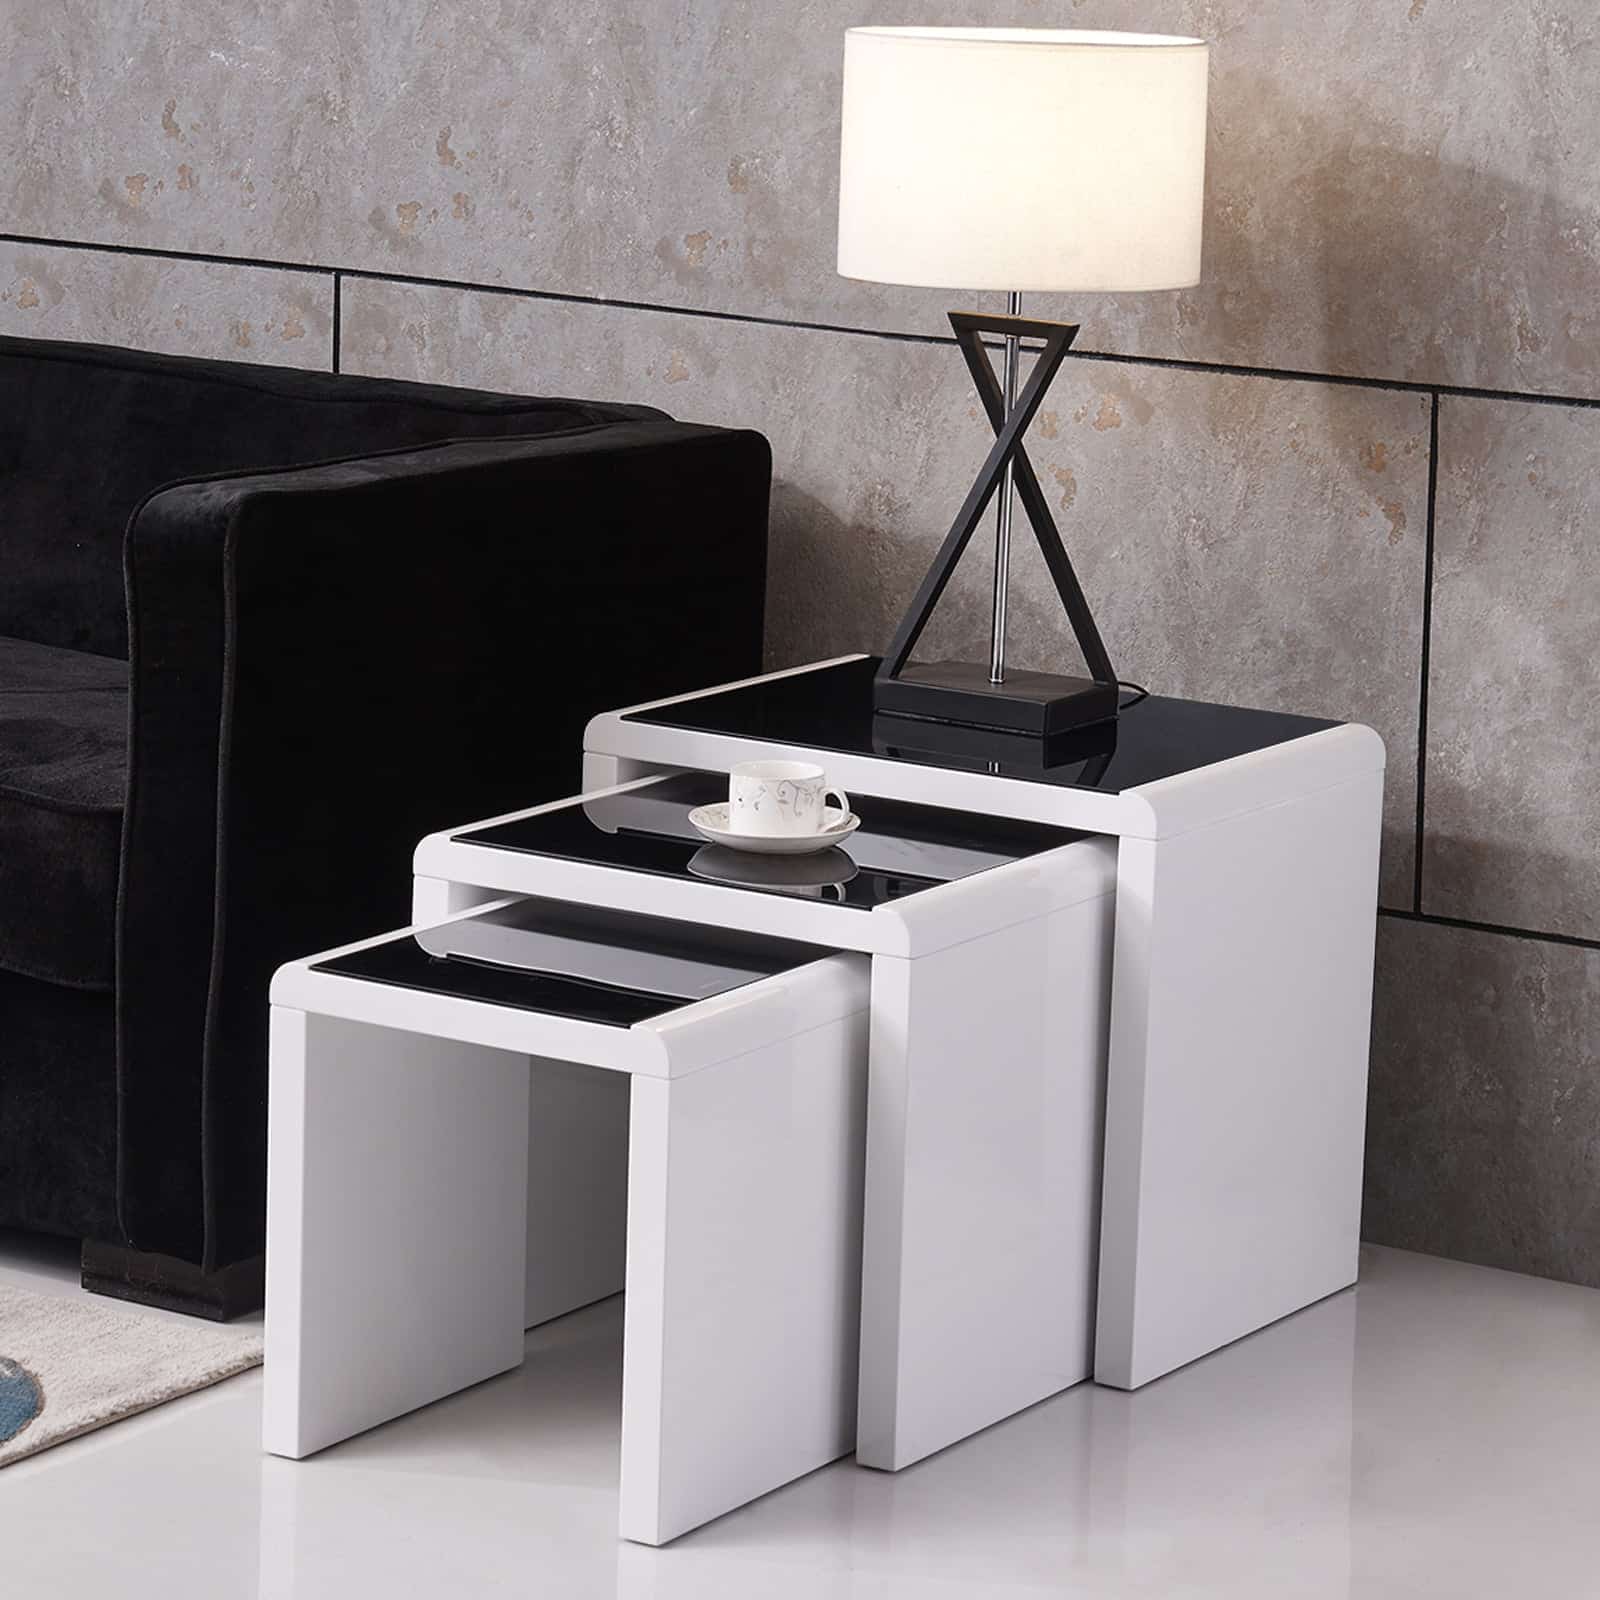 Modern Nest of 3 Coffee Table Side End Table High Gloss White Black ...